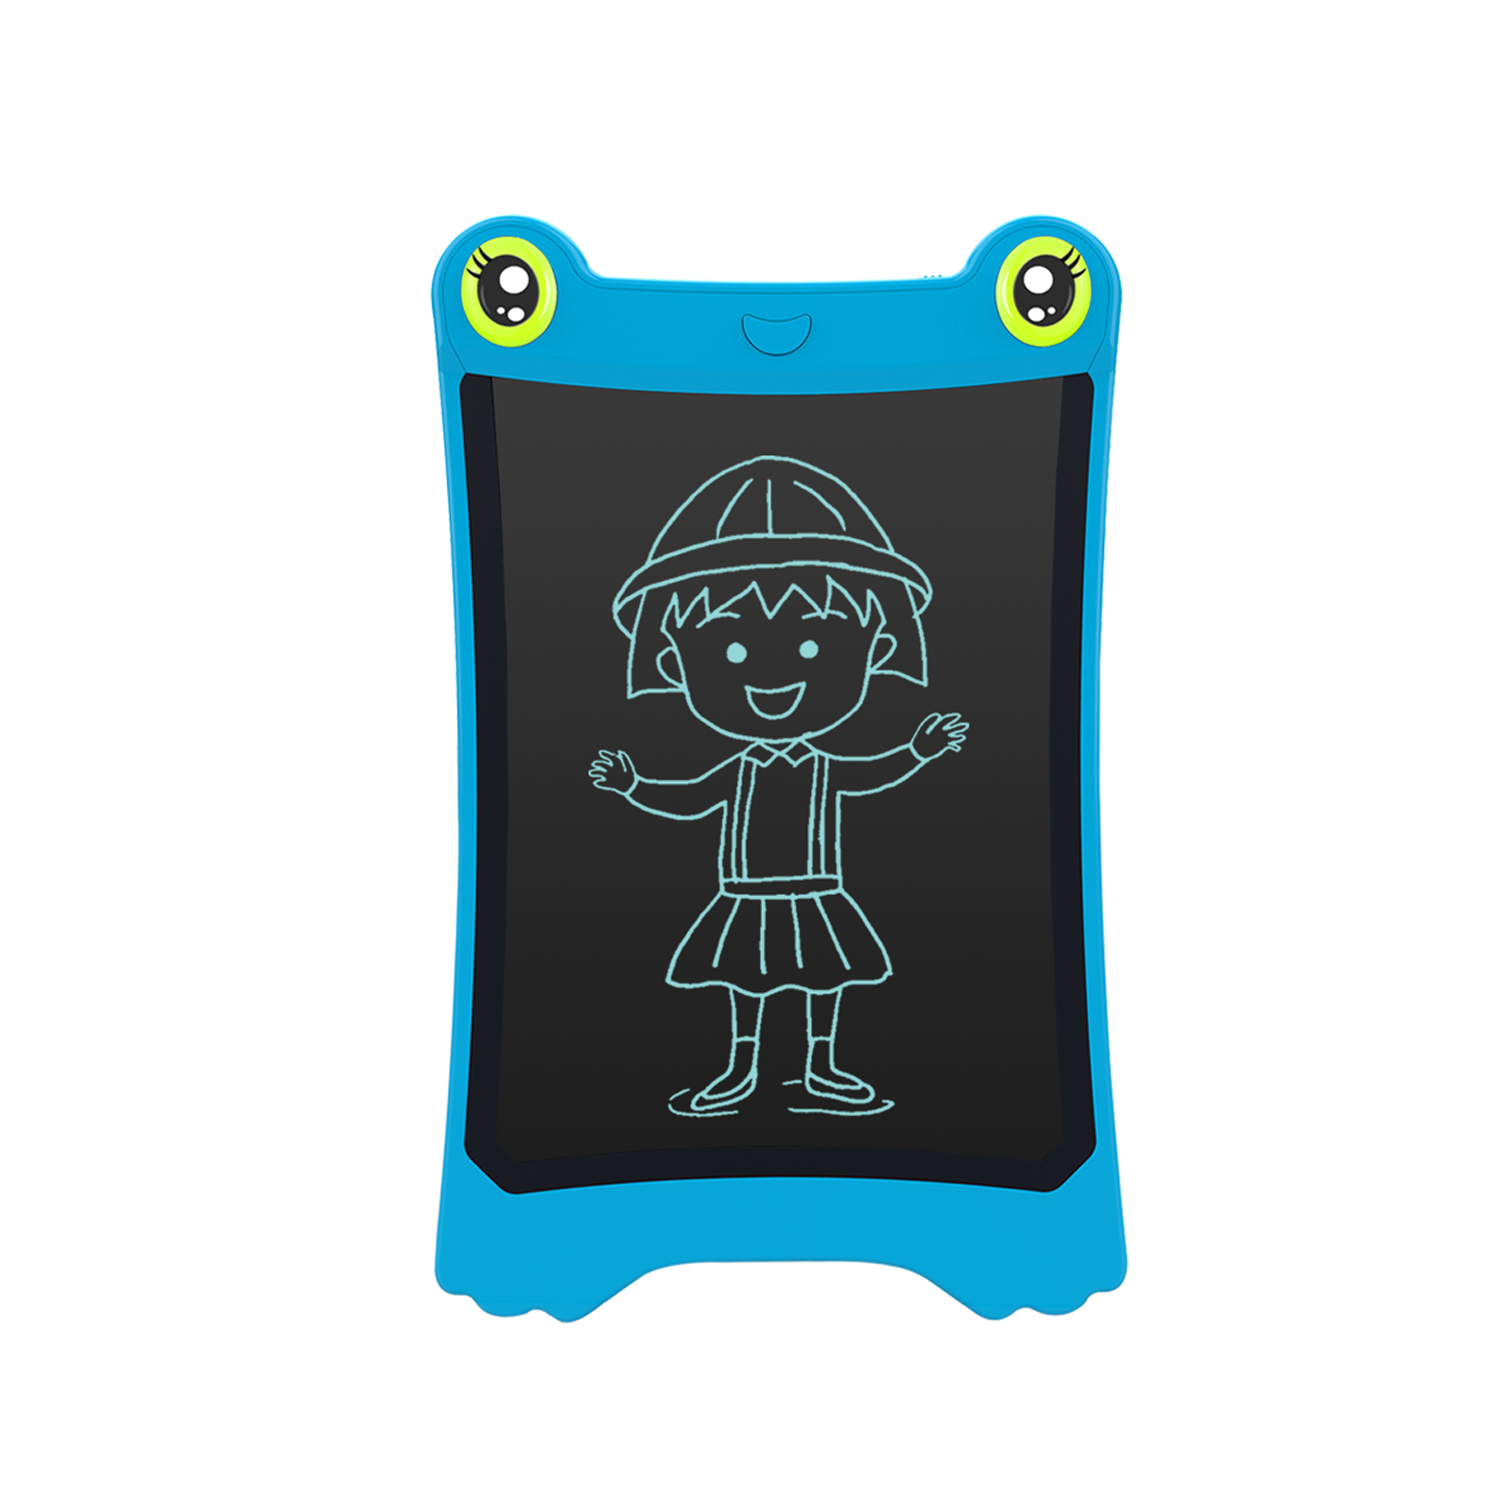 NEWYES-85-inch-Frog-Colors-screen-LCD-Writing-Tablet-Drawing-Handwriting-Pad-Message-Board-Kids-Writ-1607355-7